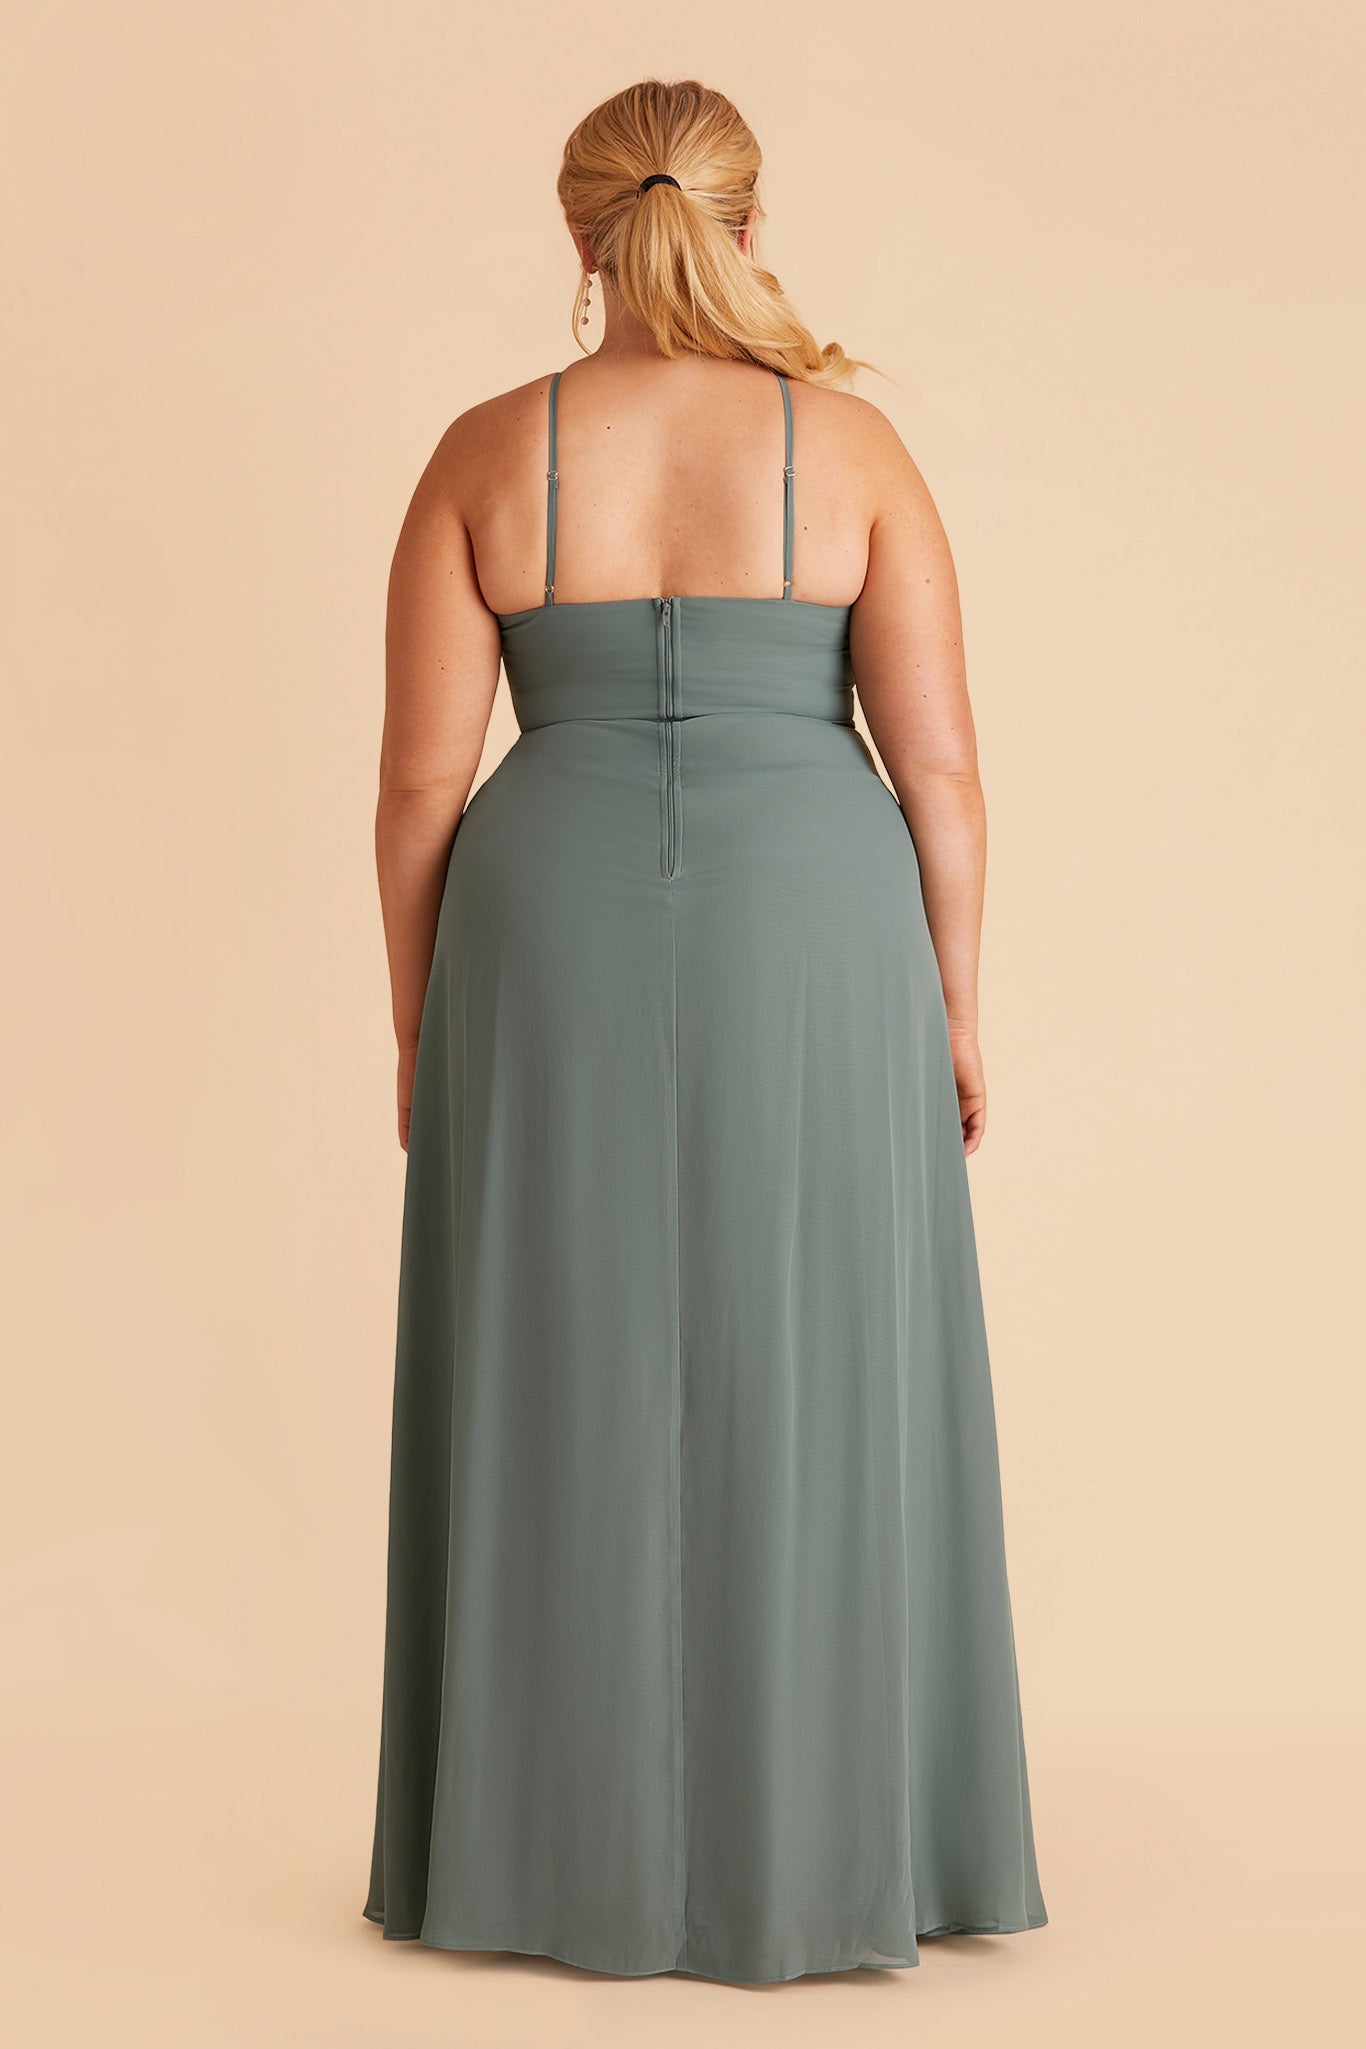 Juliet plus size bridesmaid dress with slit in sea glass chiffon by Birdy Grey, back view